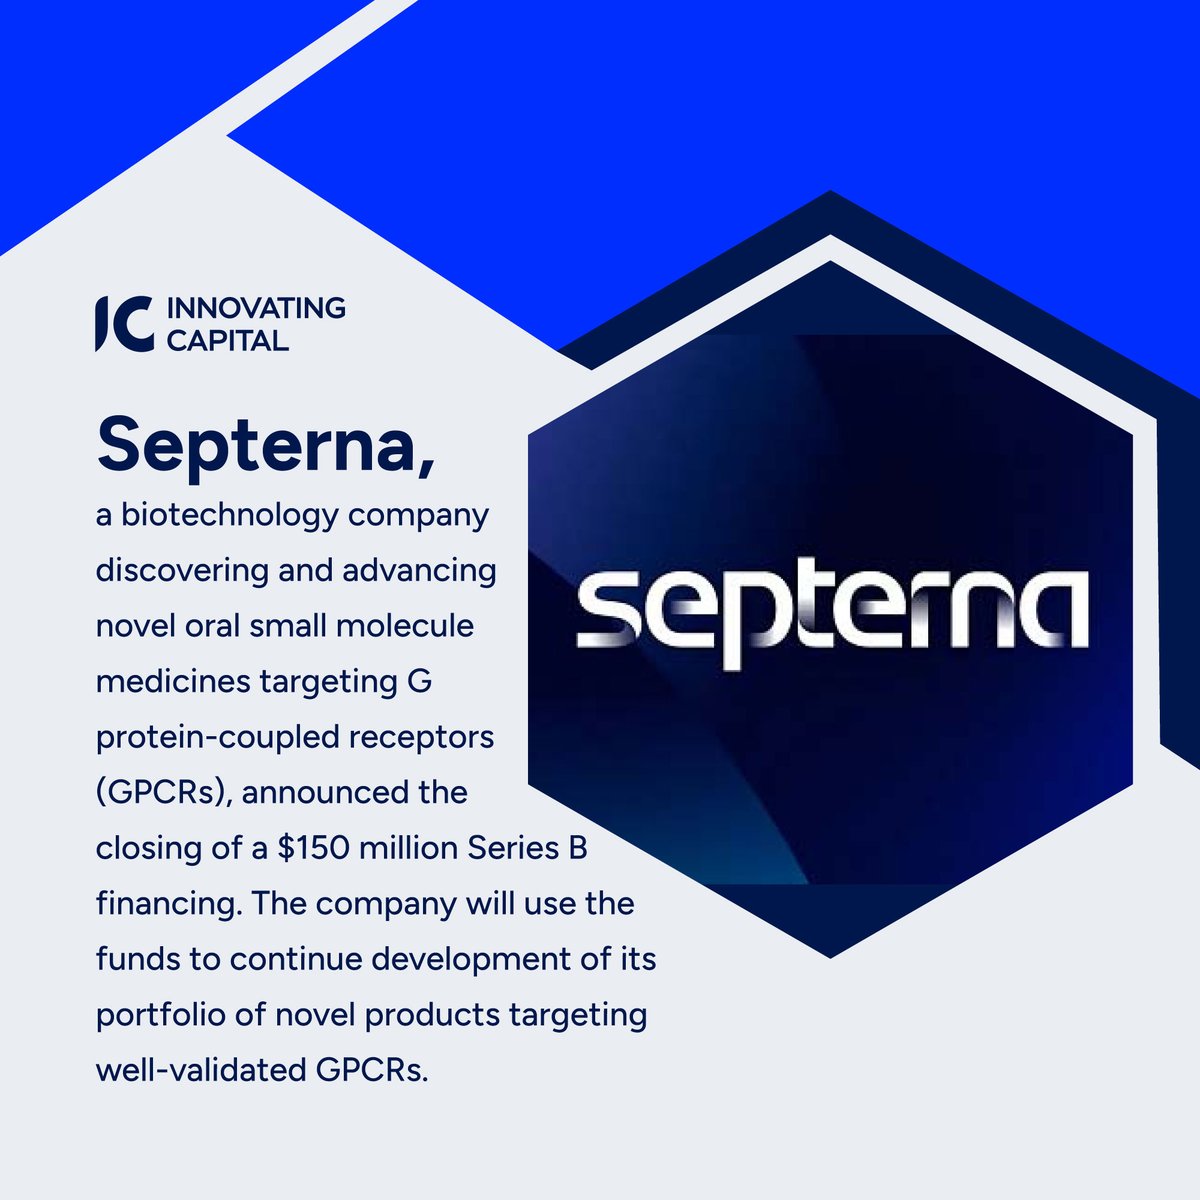 Septerna, a biotechnology company discovering and advancing novel oral small molecule medicines targeting G protein-coupled receptors (GPCRs), announced the closing of a $150 million Series B financing.
#biotechnology #seriesb #fundingnews #innovation #biotechindustry #healthcare